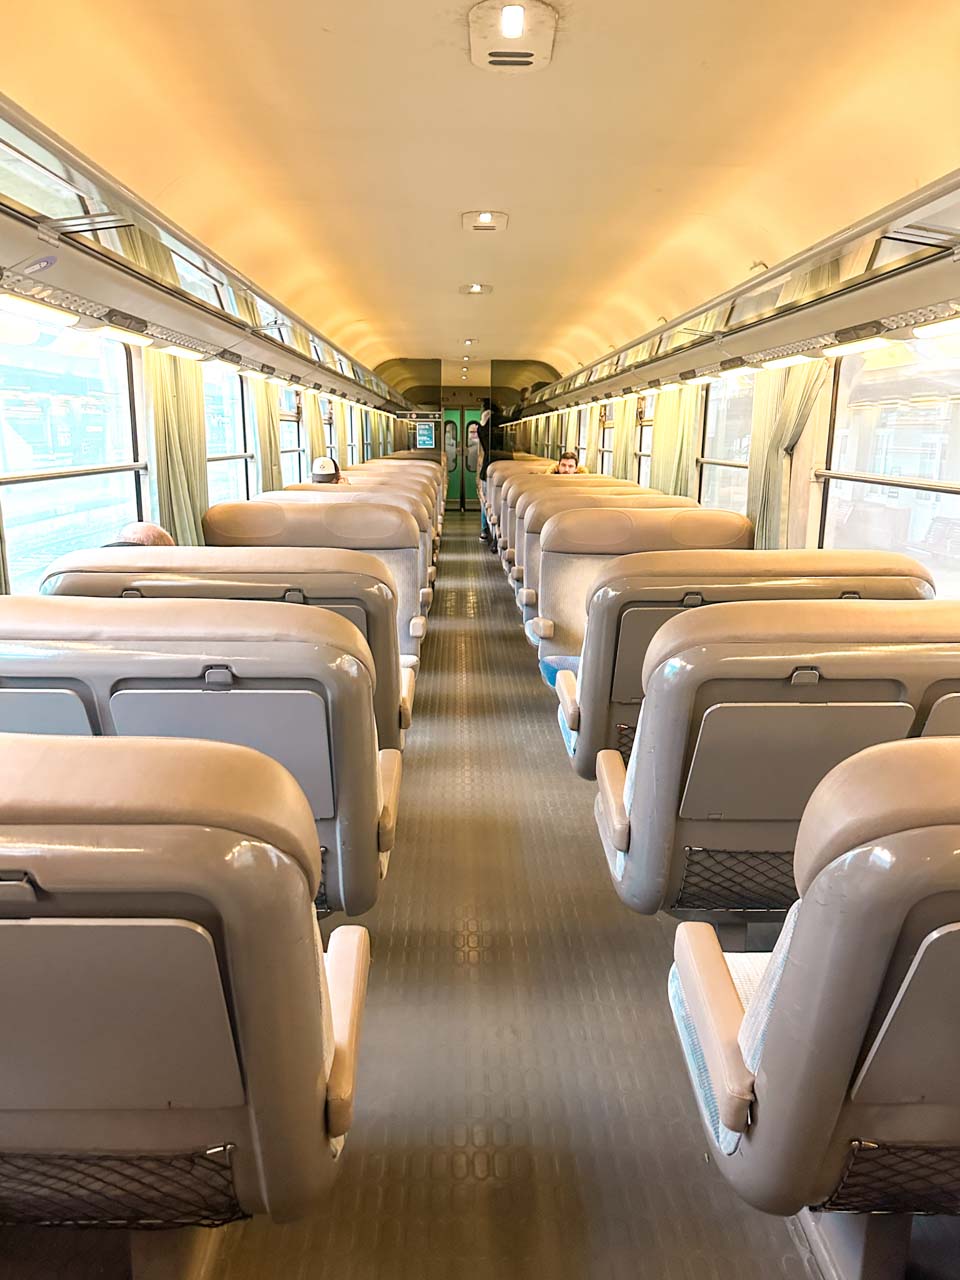 Inside view of a French train carriage with rows of empty seats